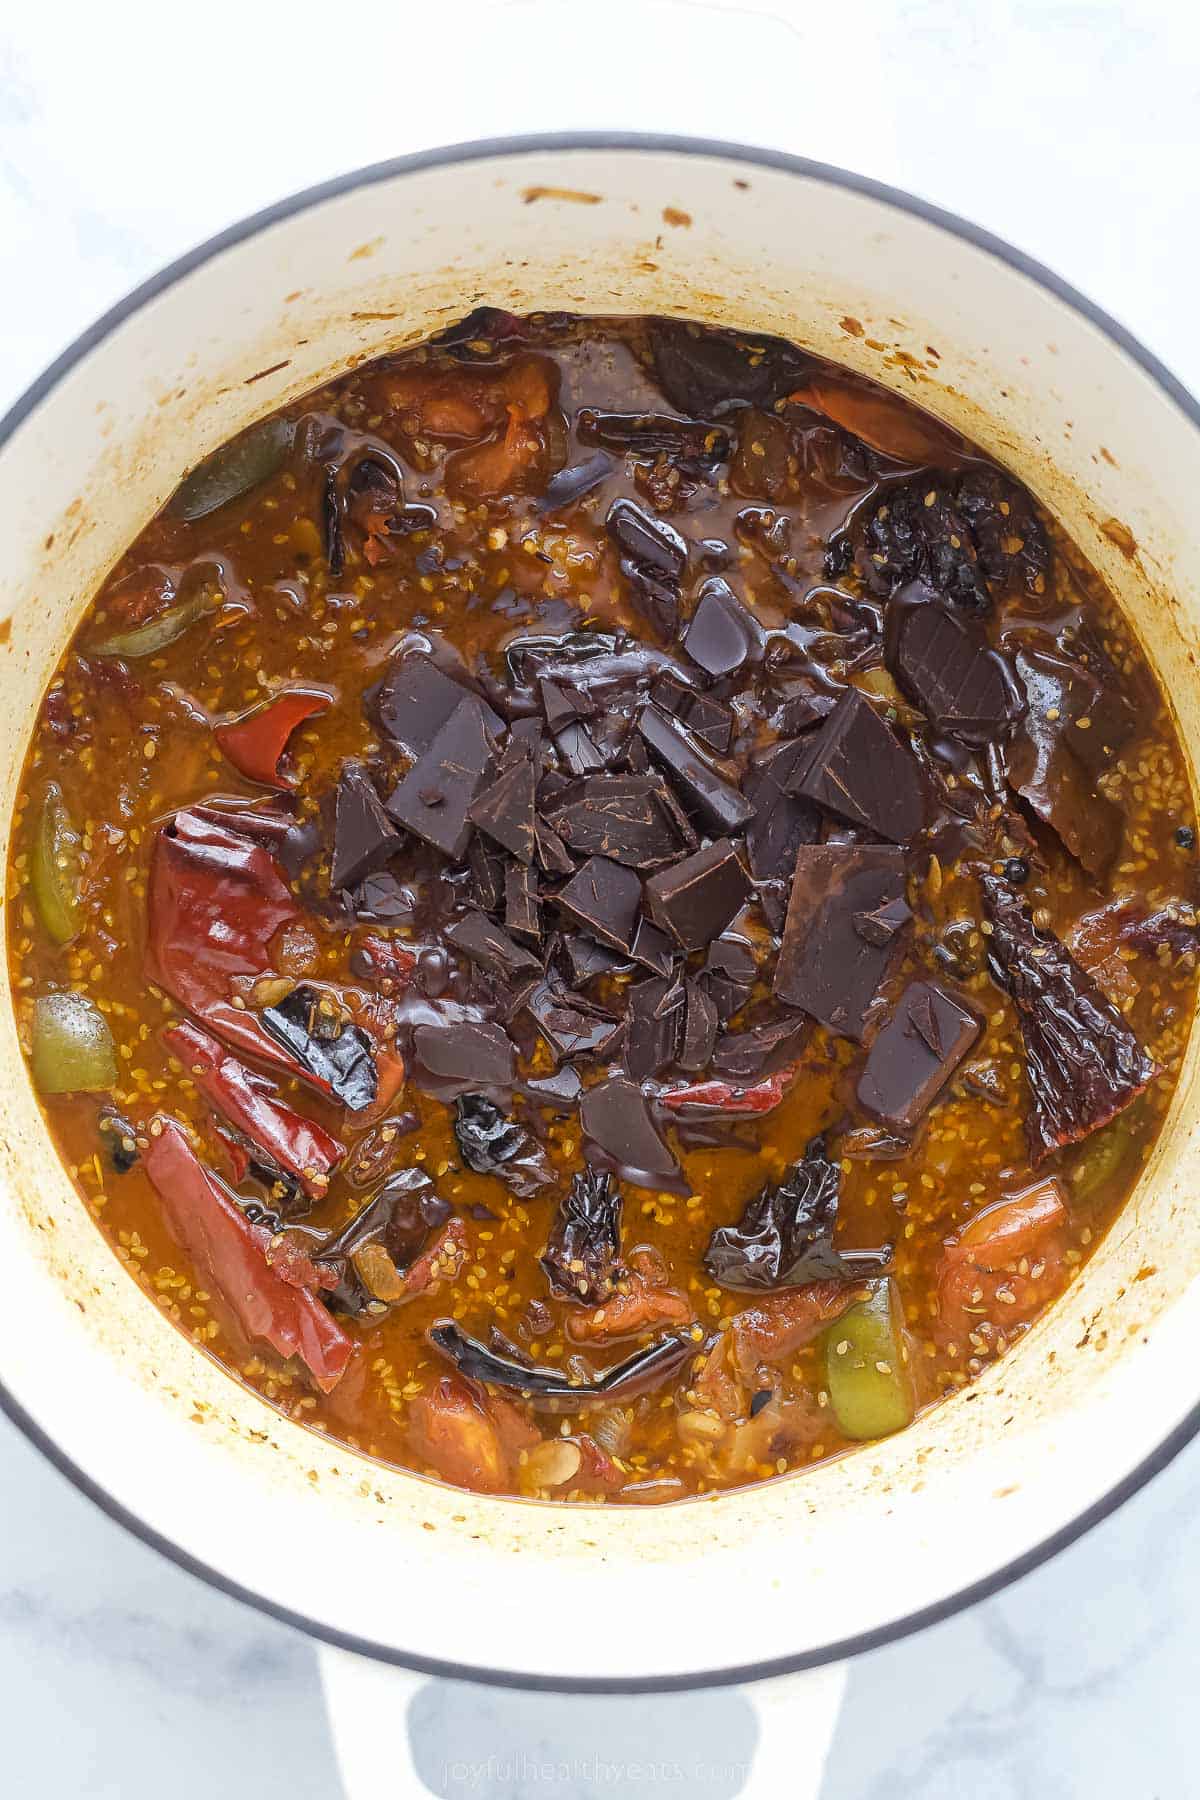 a dark colored base sauce with dried chilies, tomatoes, and ،es